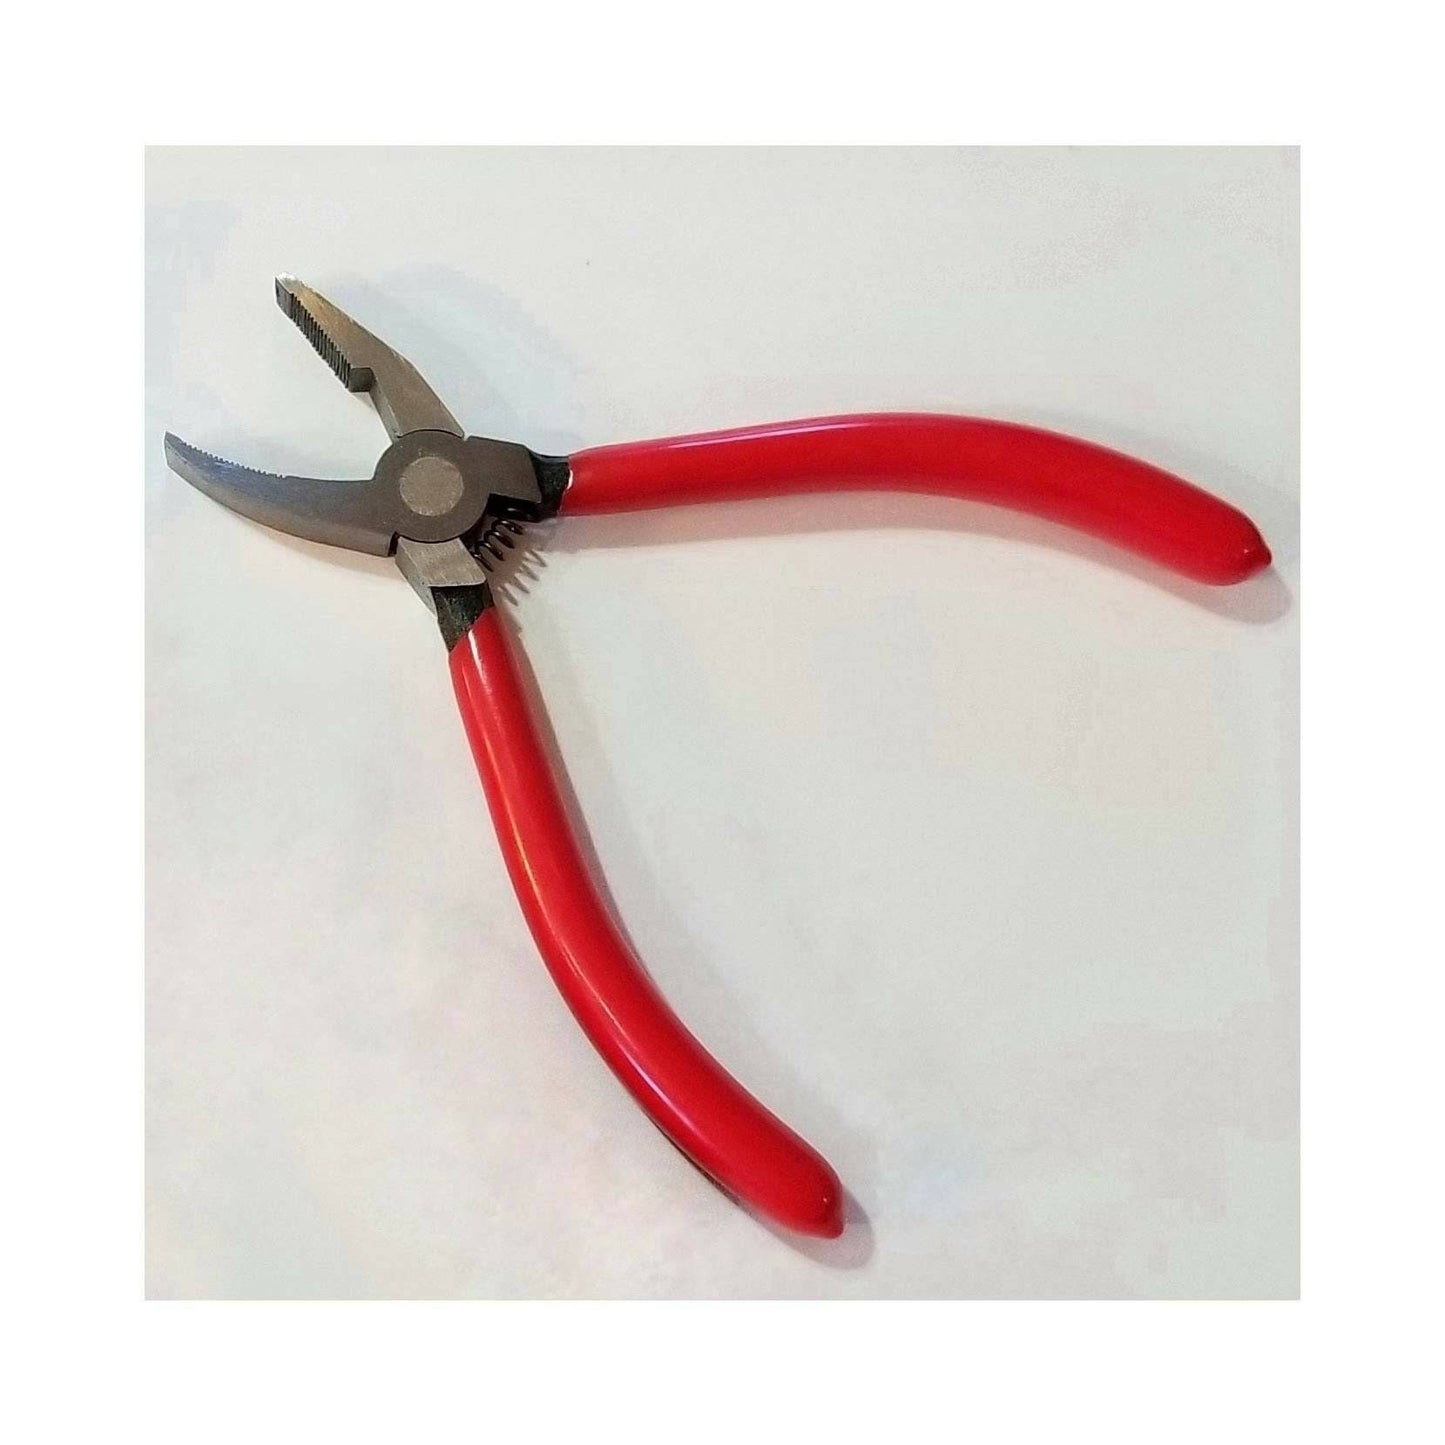 Stained Glass Pliers, Grozer for Shaping Glass Along Score. Nippers, Serrated jaw to nibble edges. Sturdy metal with red coated handles.